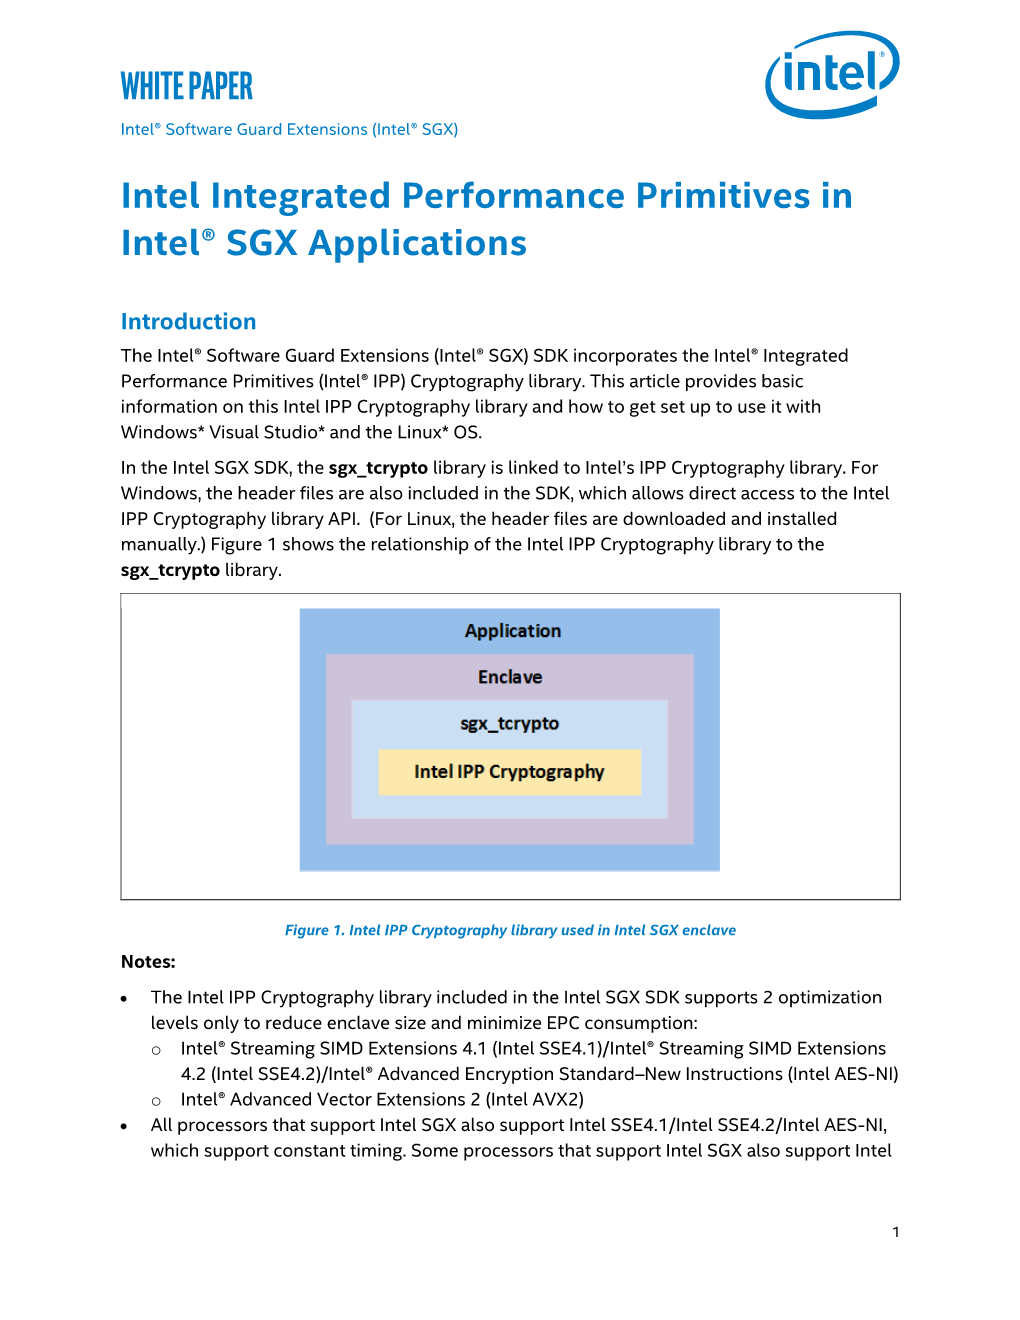 Intel Integrated Performance Primitives in Intel® SGX Applications